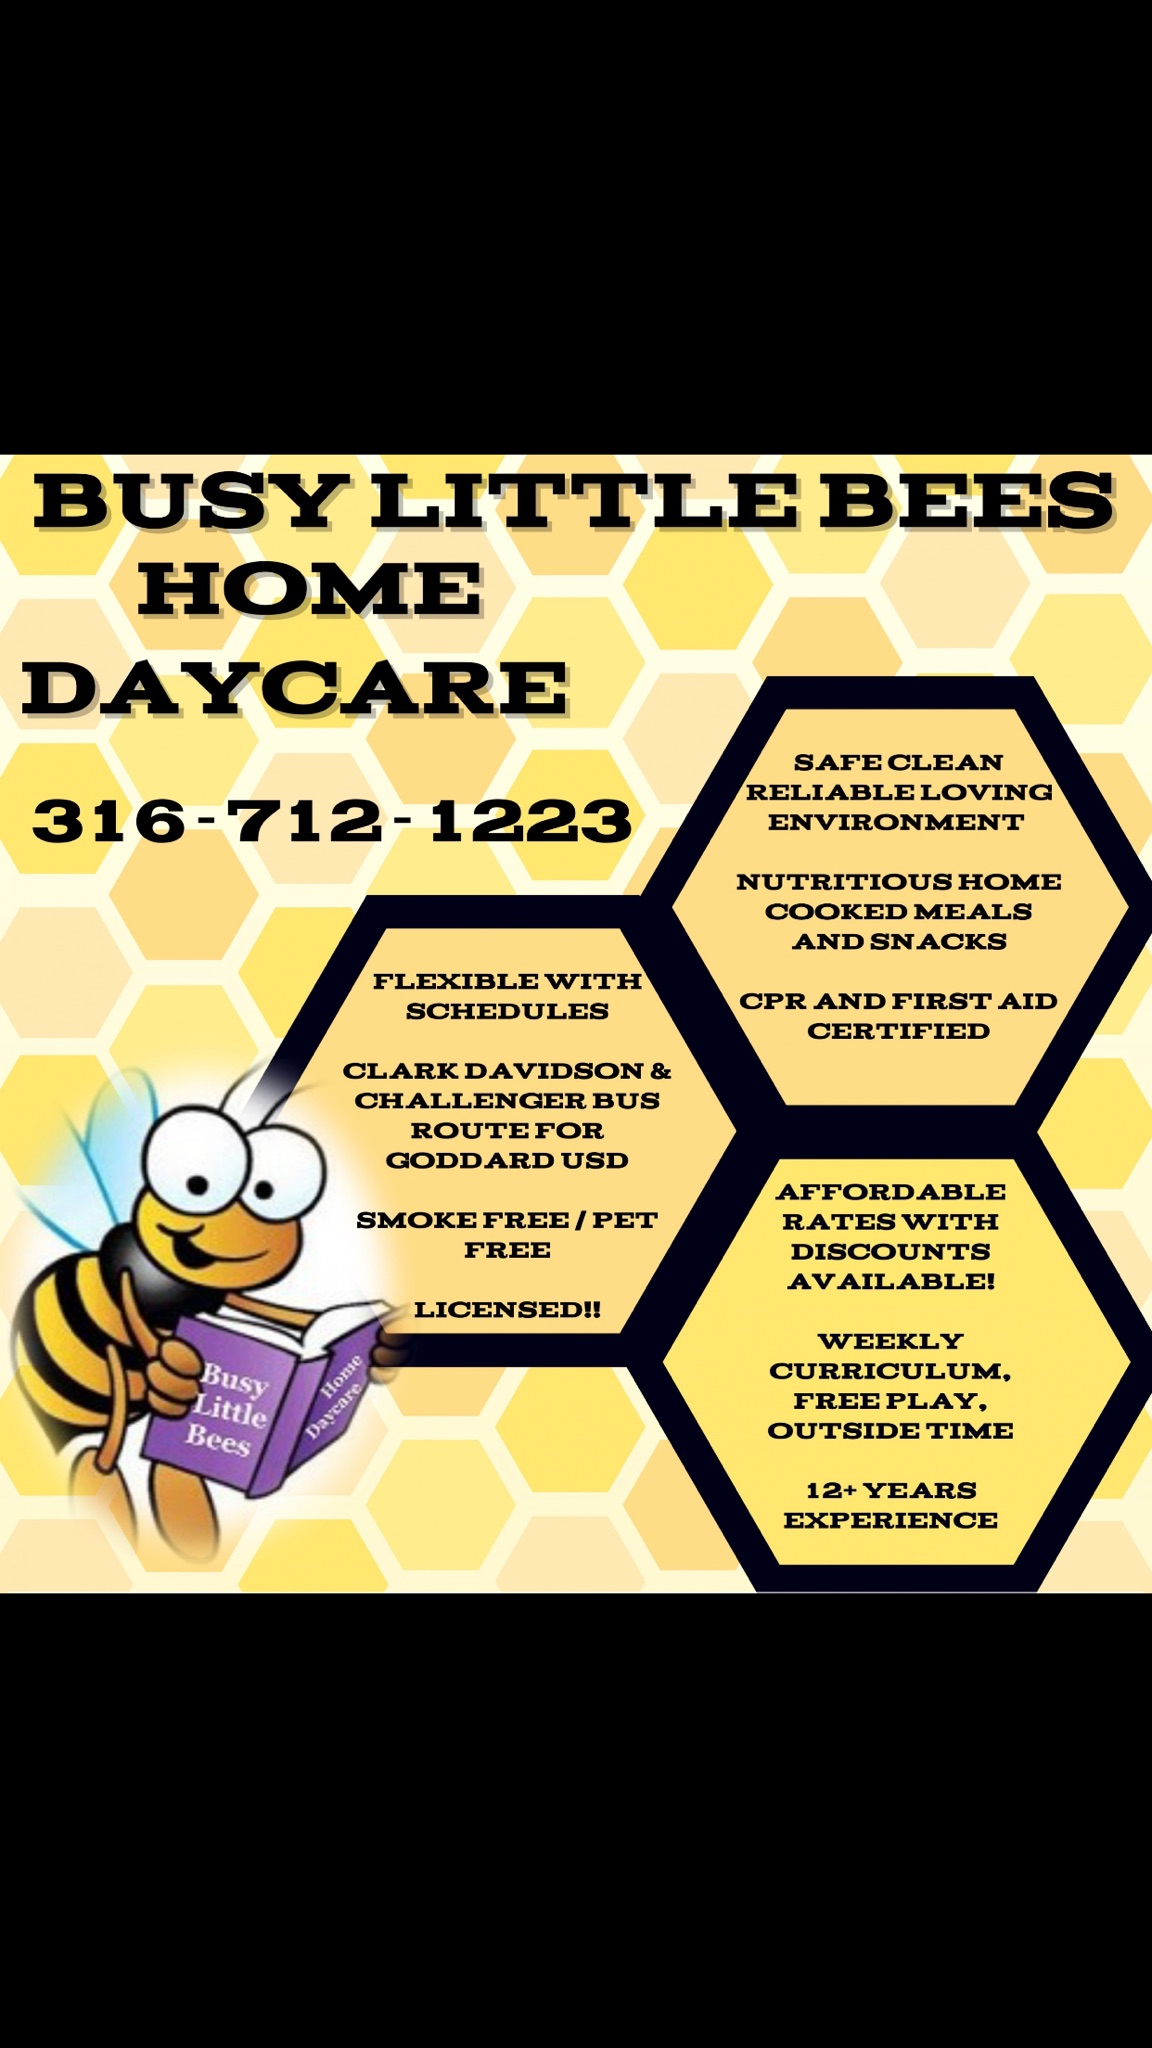 Busy Little Bees Home Daycare